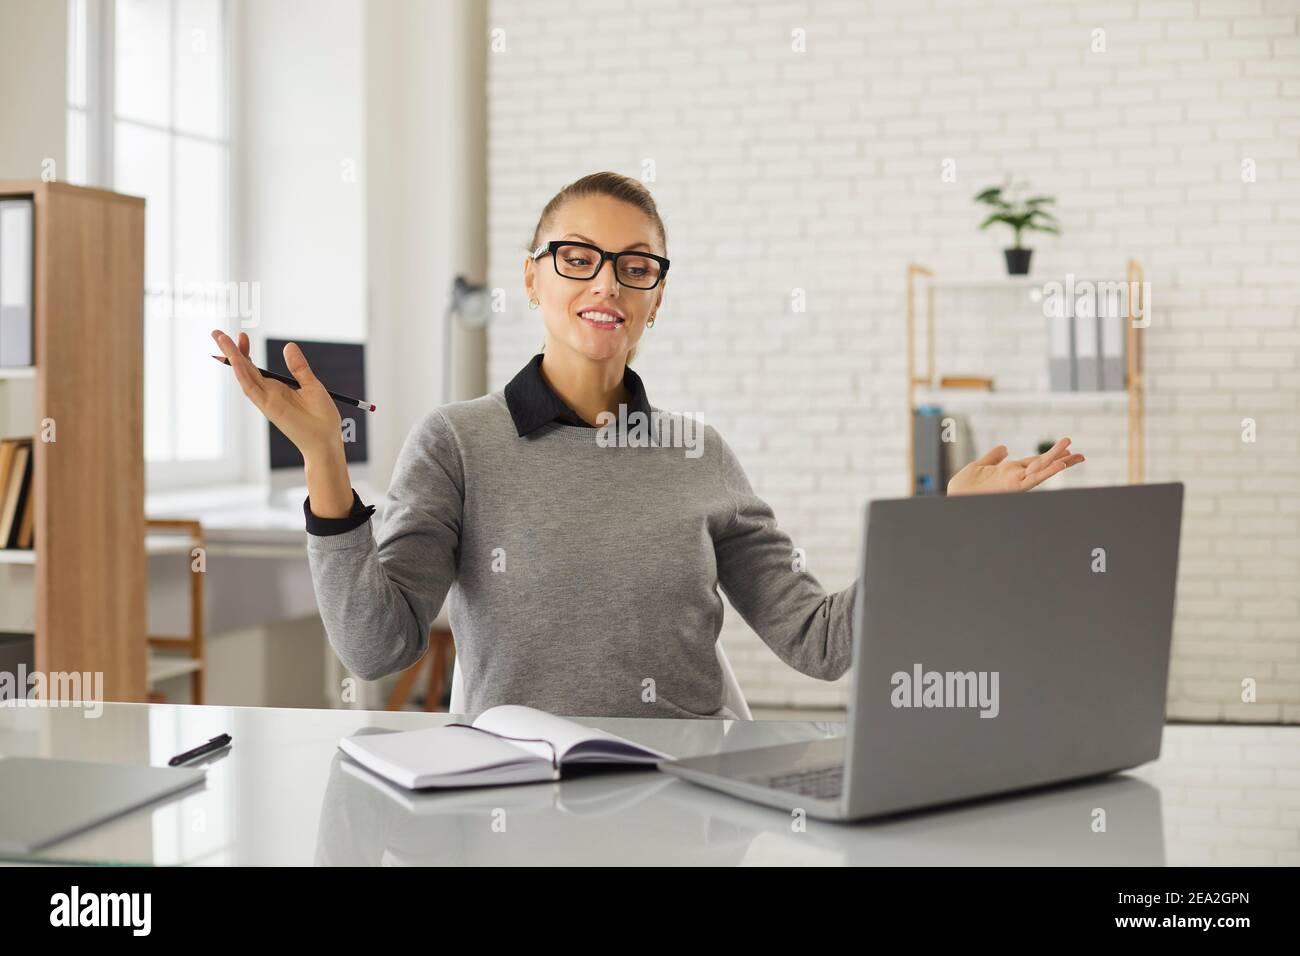 Young positive woman office worker gesticulating during online communication teleconference Stock Photo